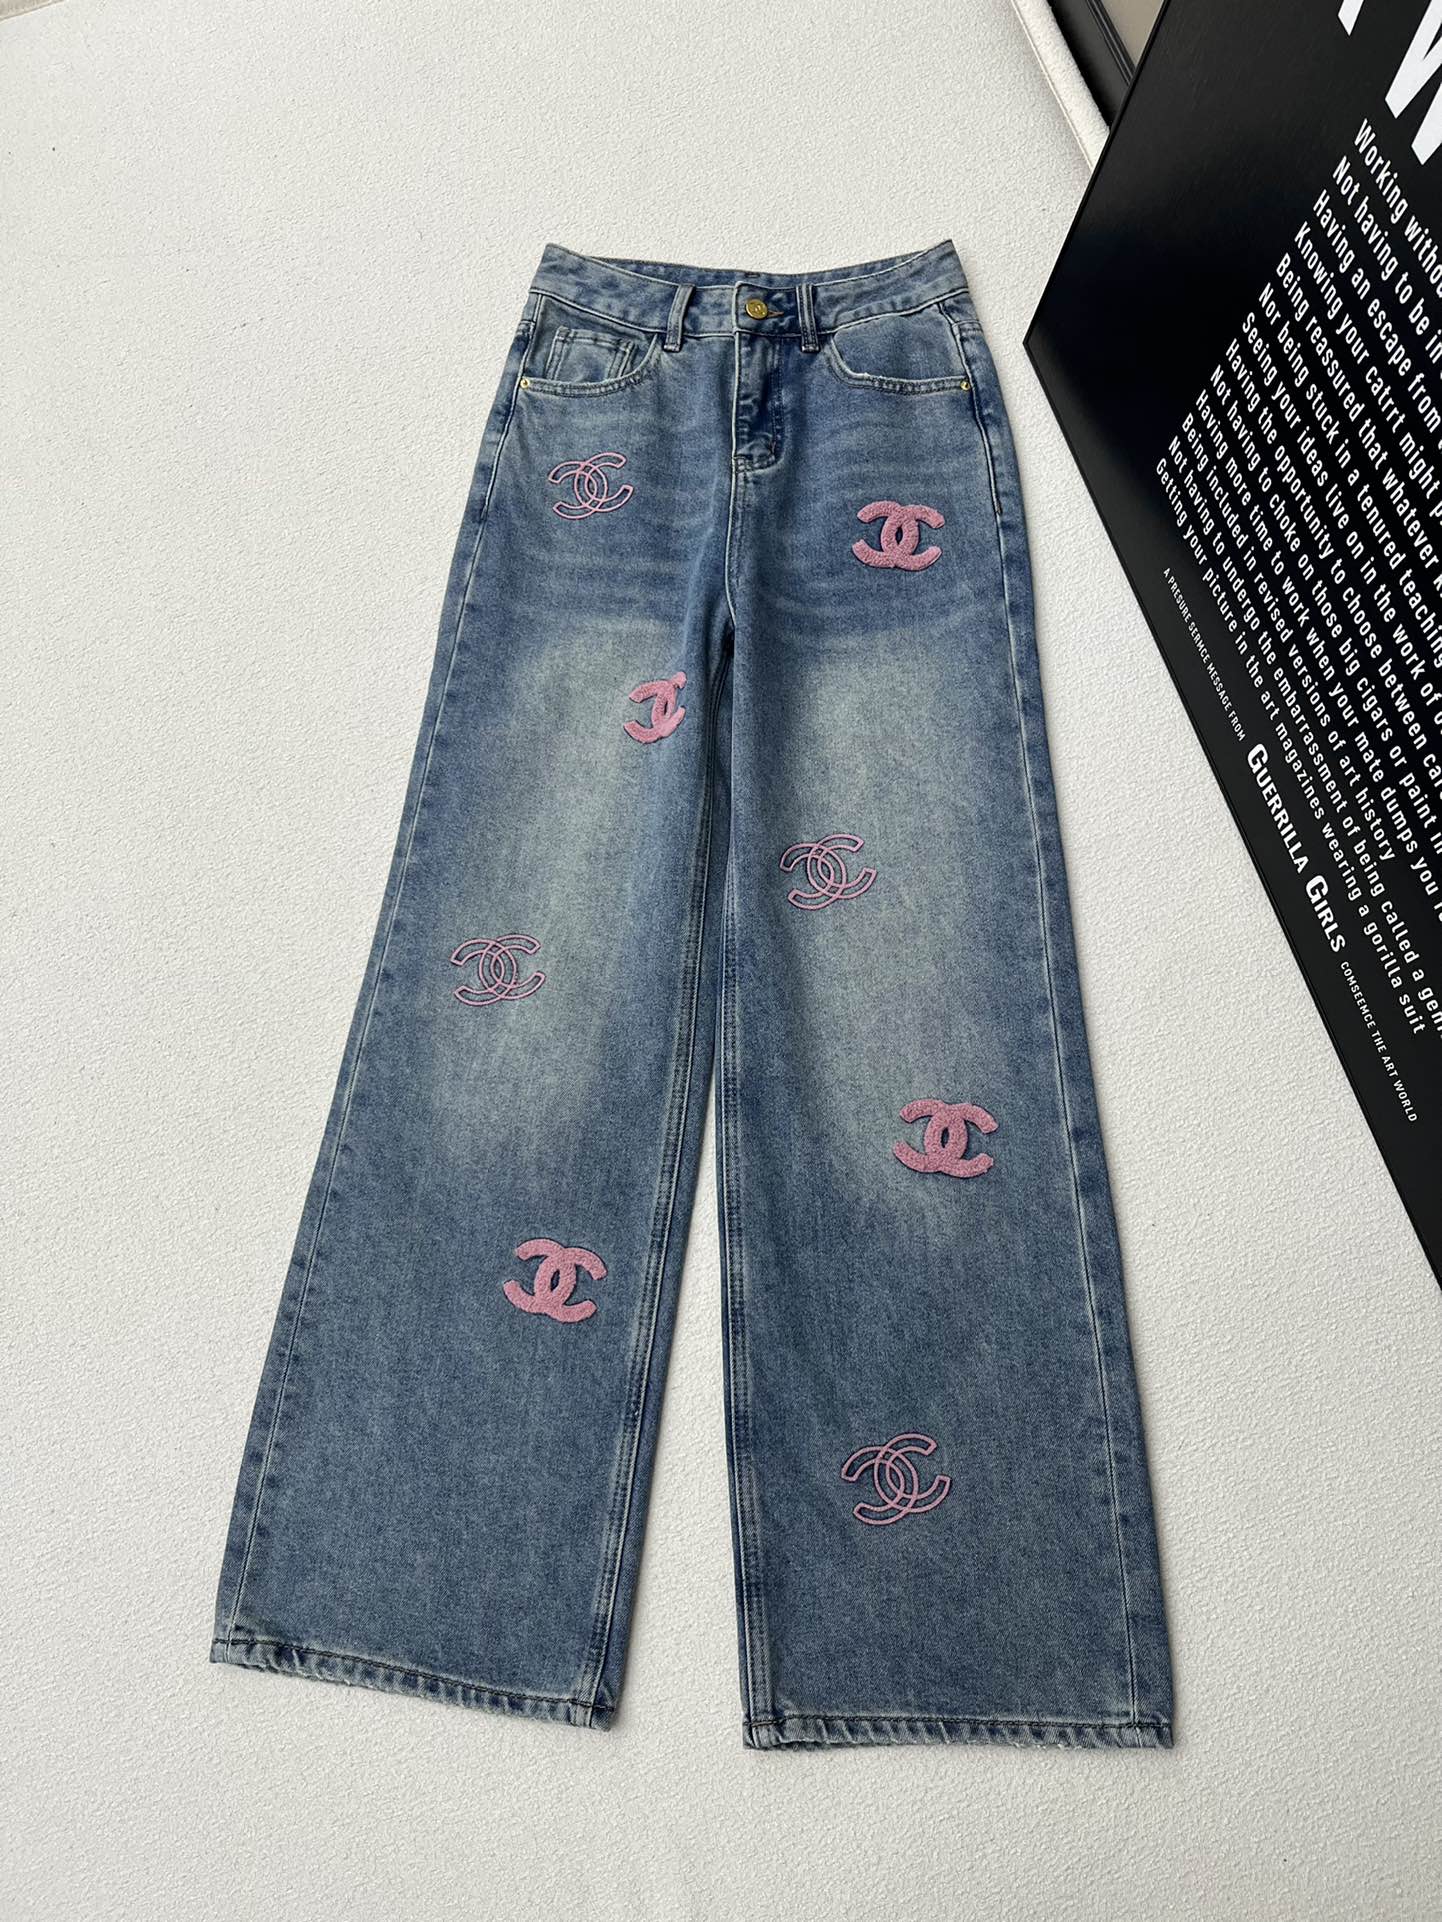 Replcia Cheap From China
 Chanel Clothing Jeans Blue Pink White Denim